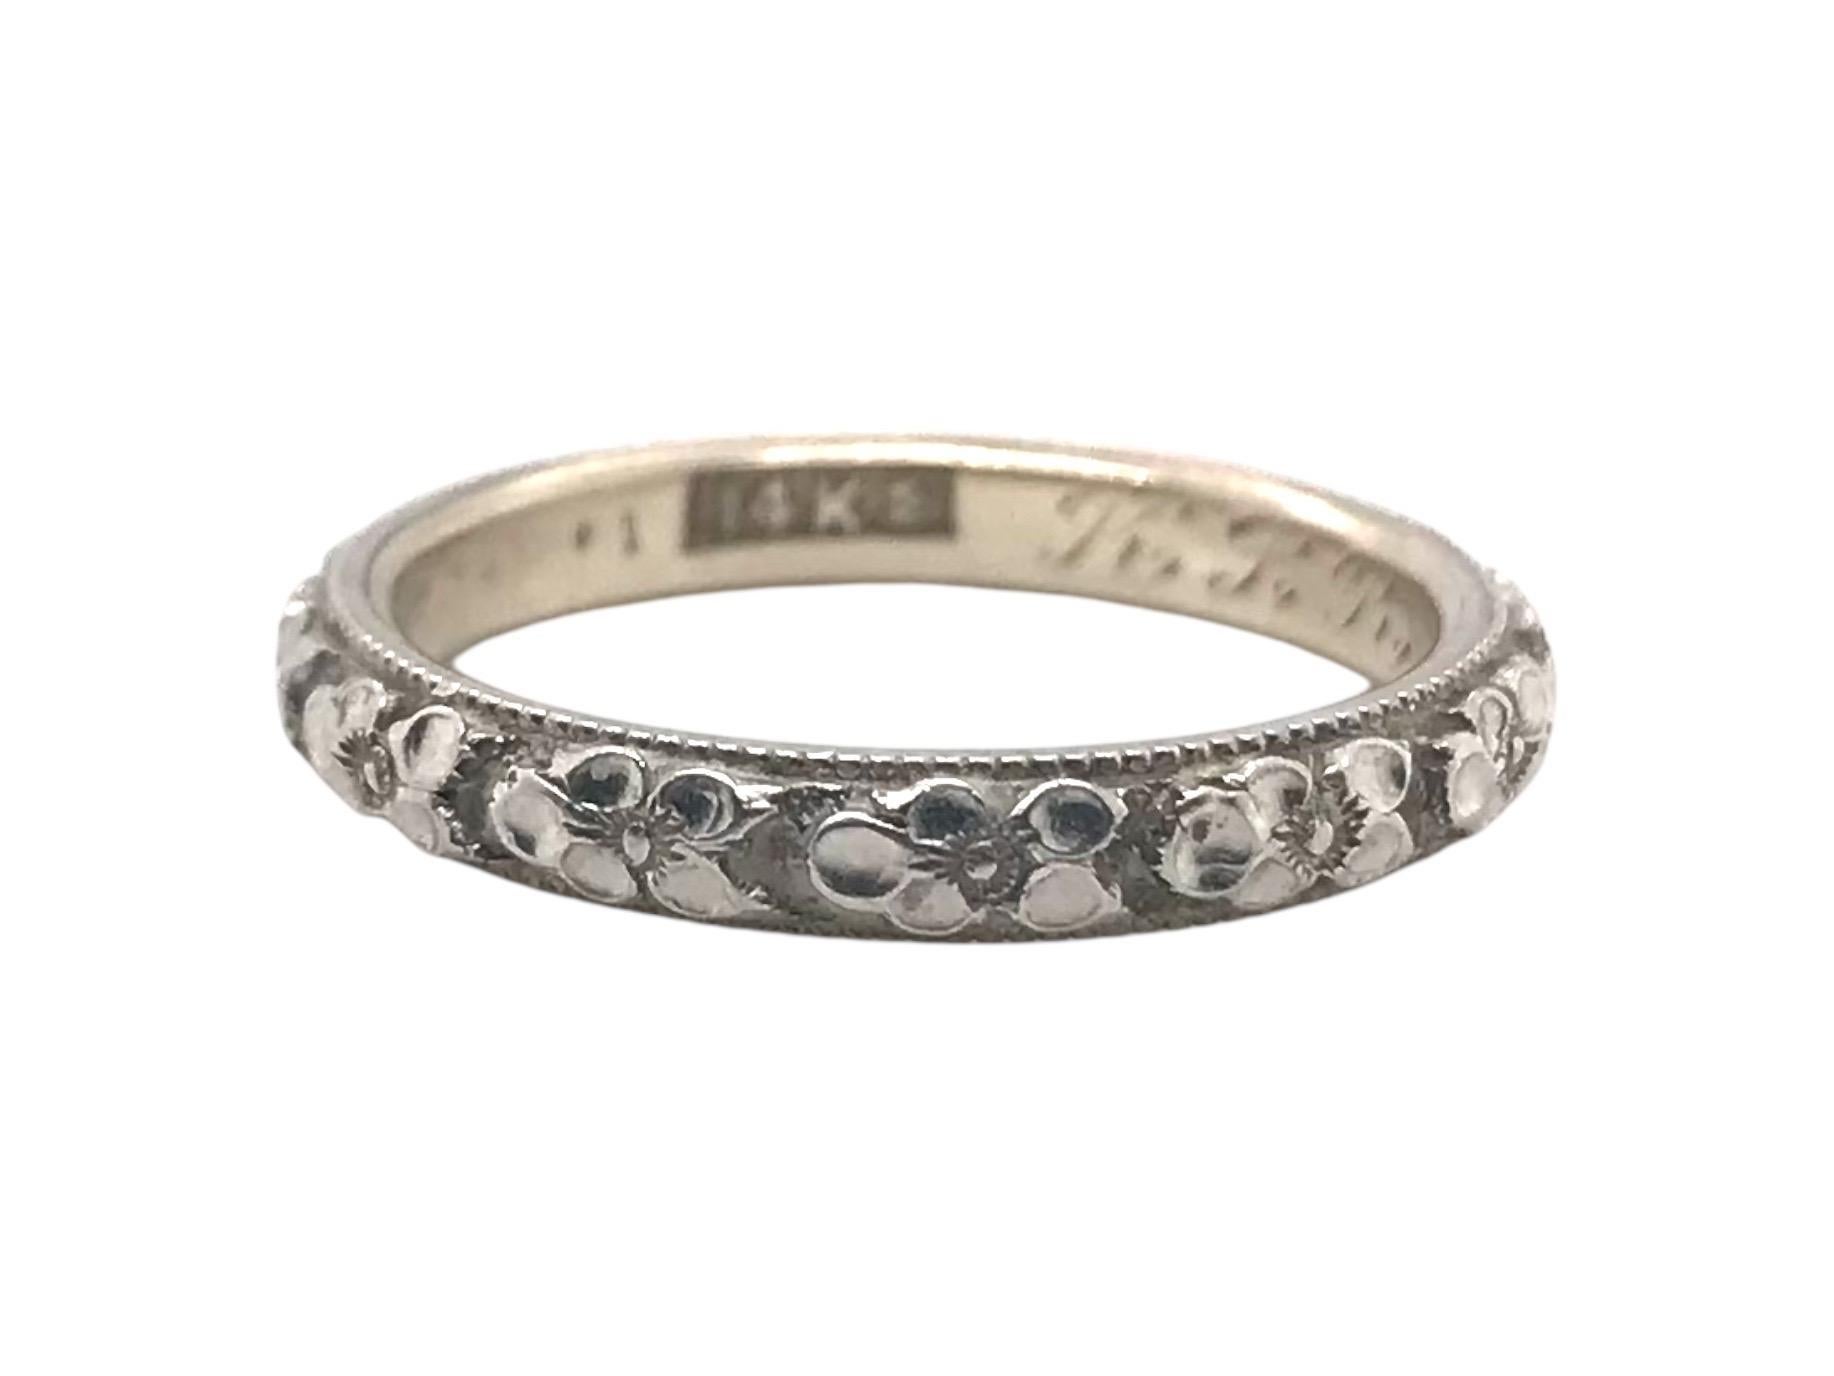 Vintage Platinum Engraved Wedding Band Size 5.5 In Good Condition For Sale In Montgomery, AL